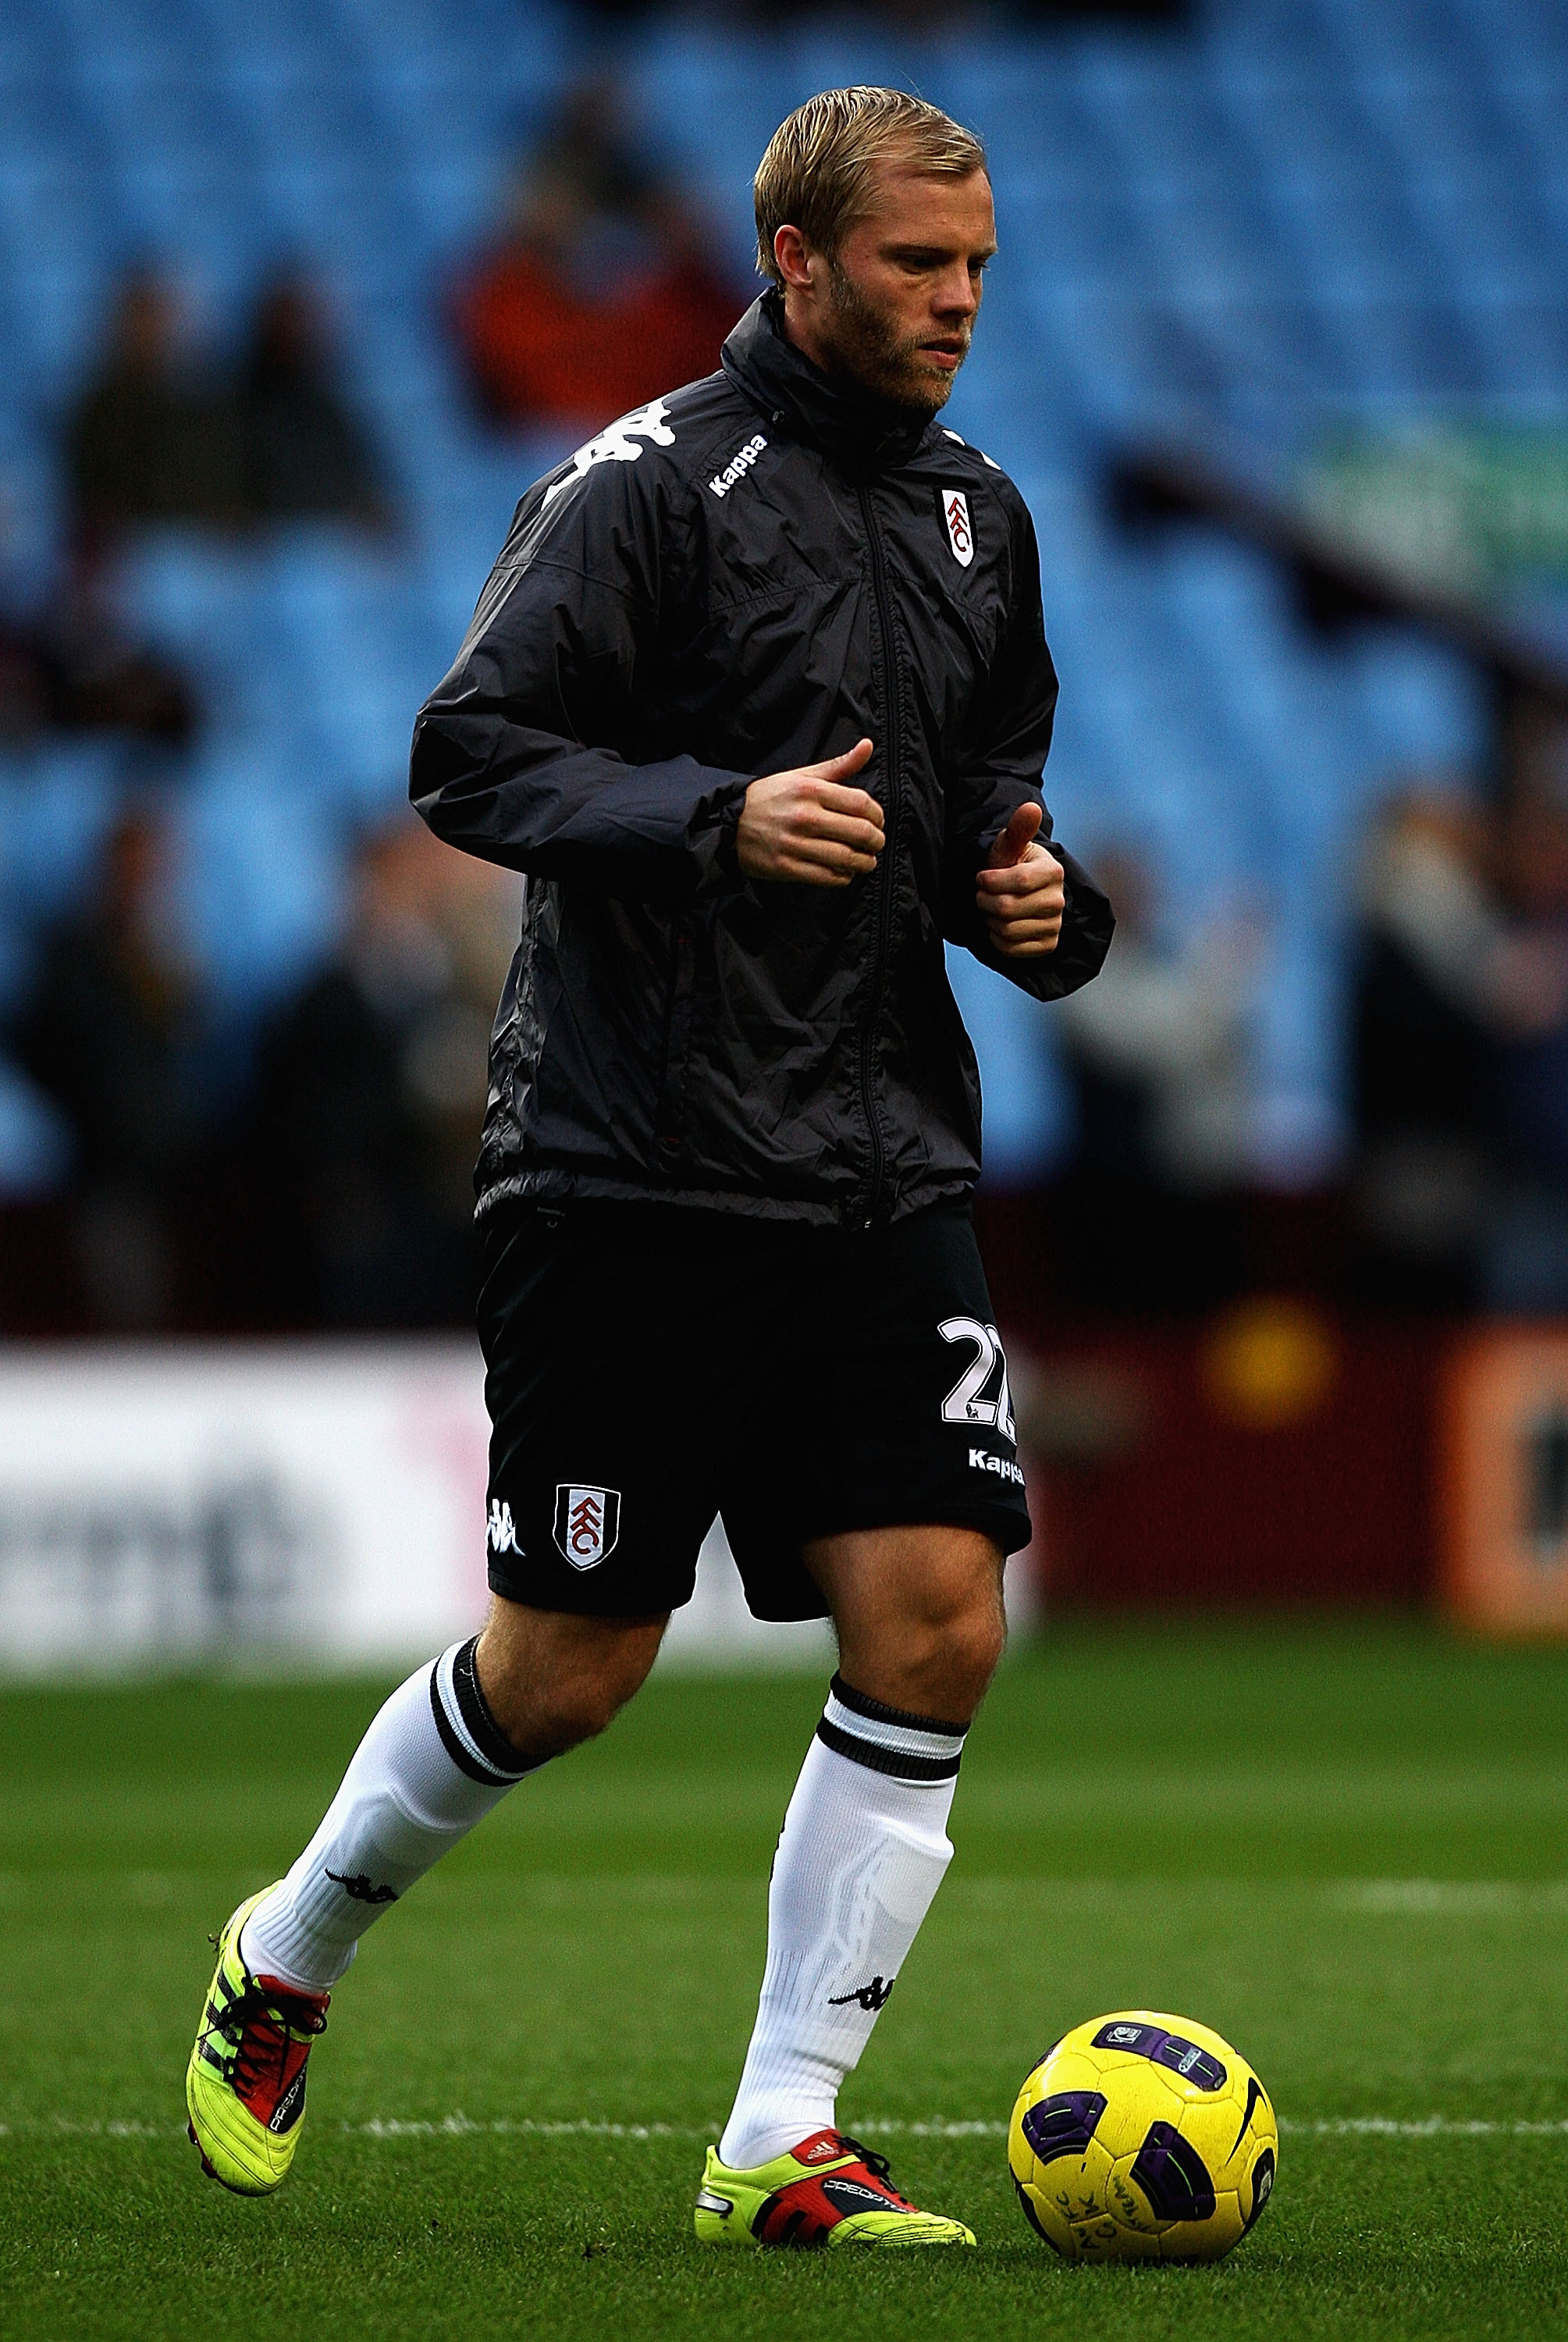 BIRMINGHAM, ENGLAND - FEBRUARY 05:  Eidur Gudjohnsen of Fulham warms up ahead of the Barclays Premier League match between Aston Villa and Fulham at Villa Park on February 5, 2011 in Birmingham, England.  (Photo by Matthew Lewis/Getty Images)